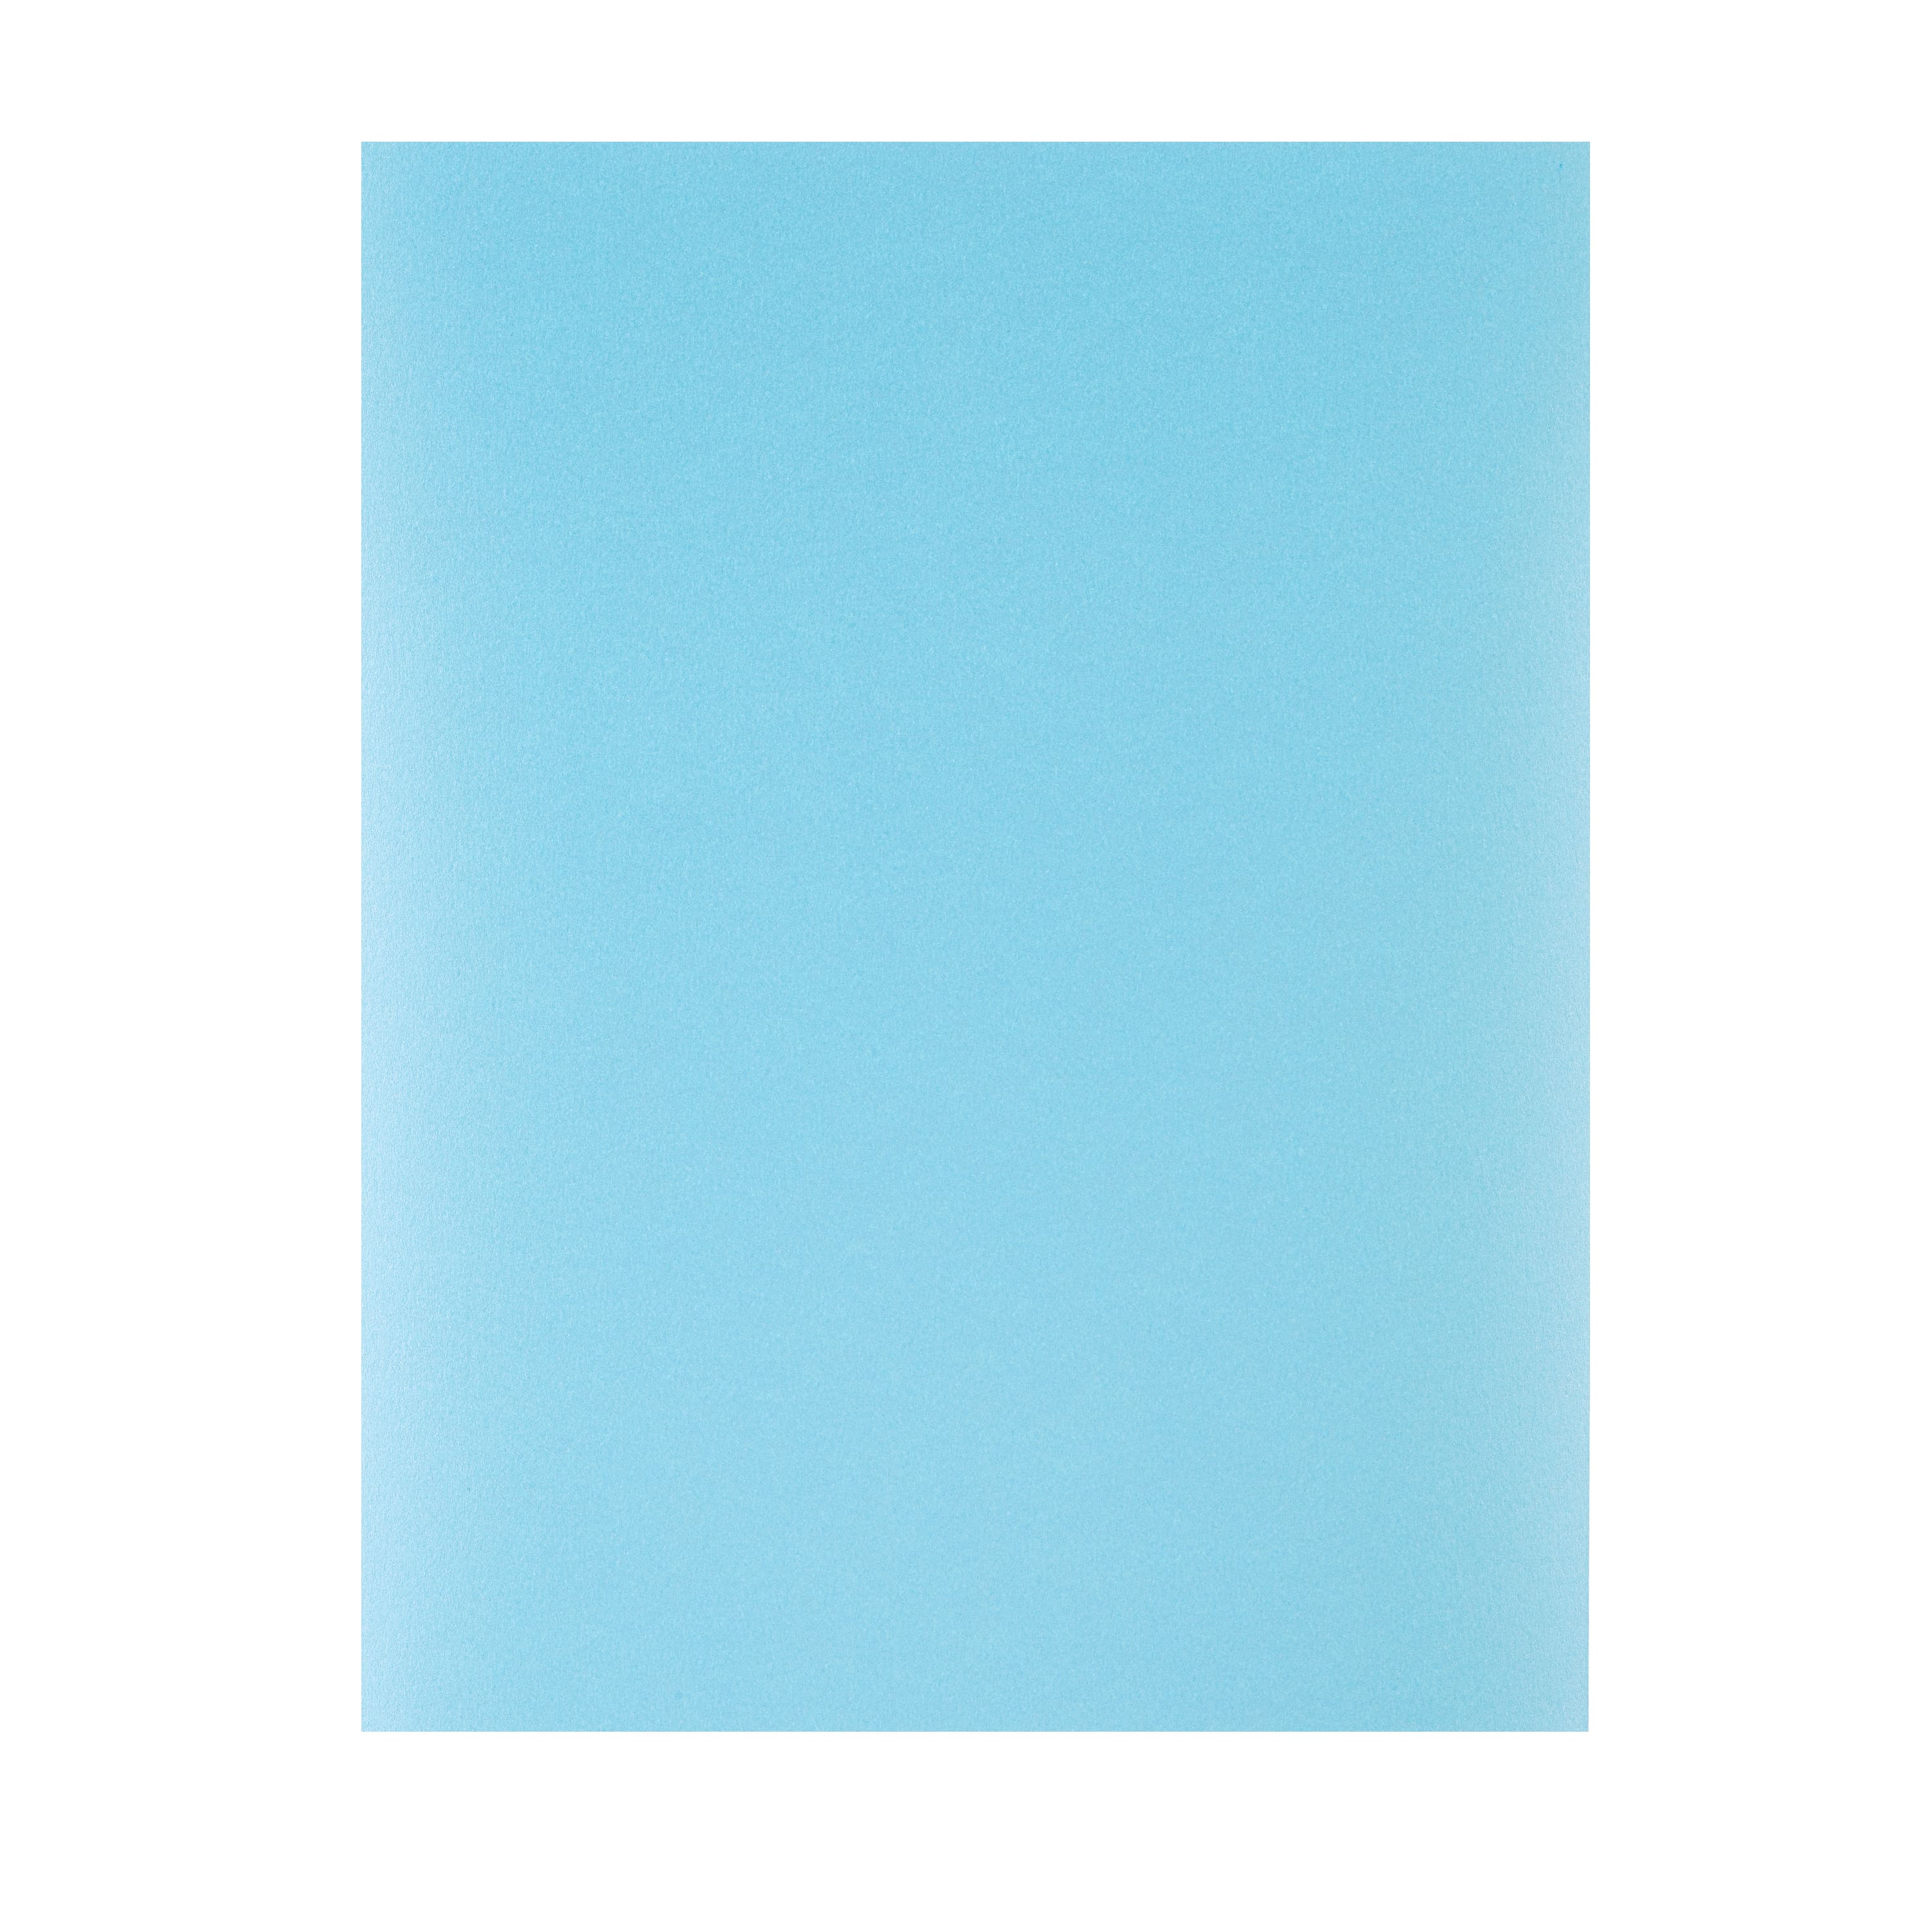 Blue Glisten Paper by Recollections®, 12 x 12